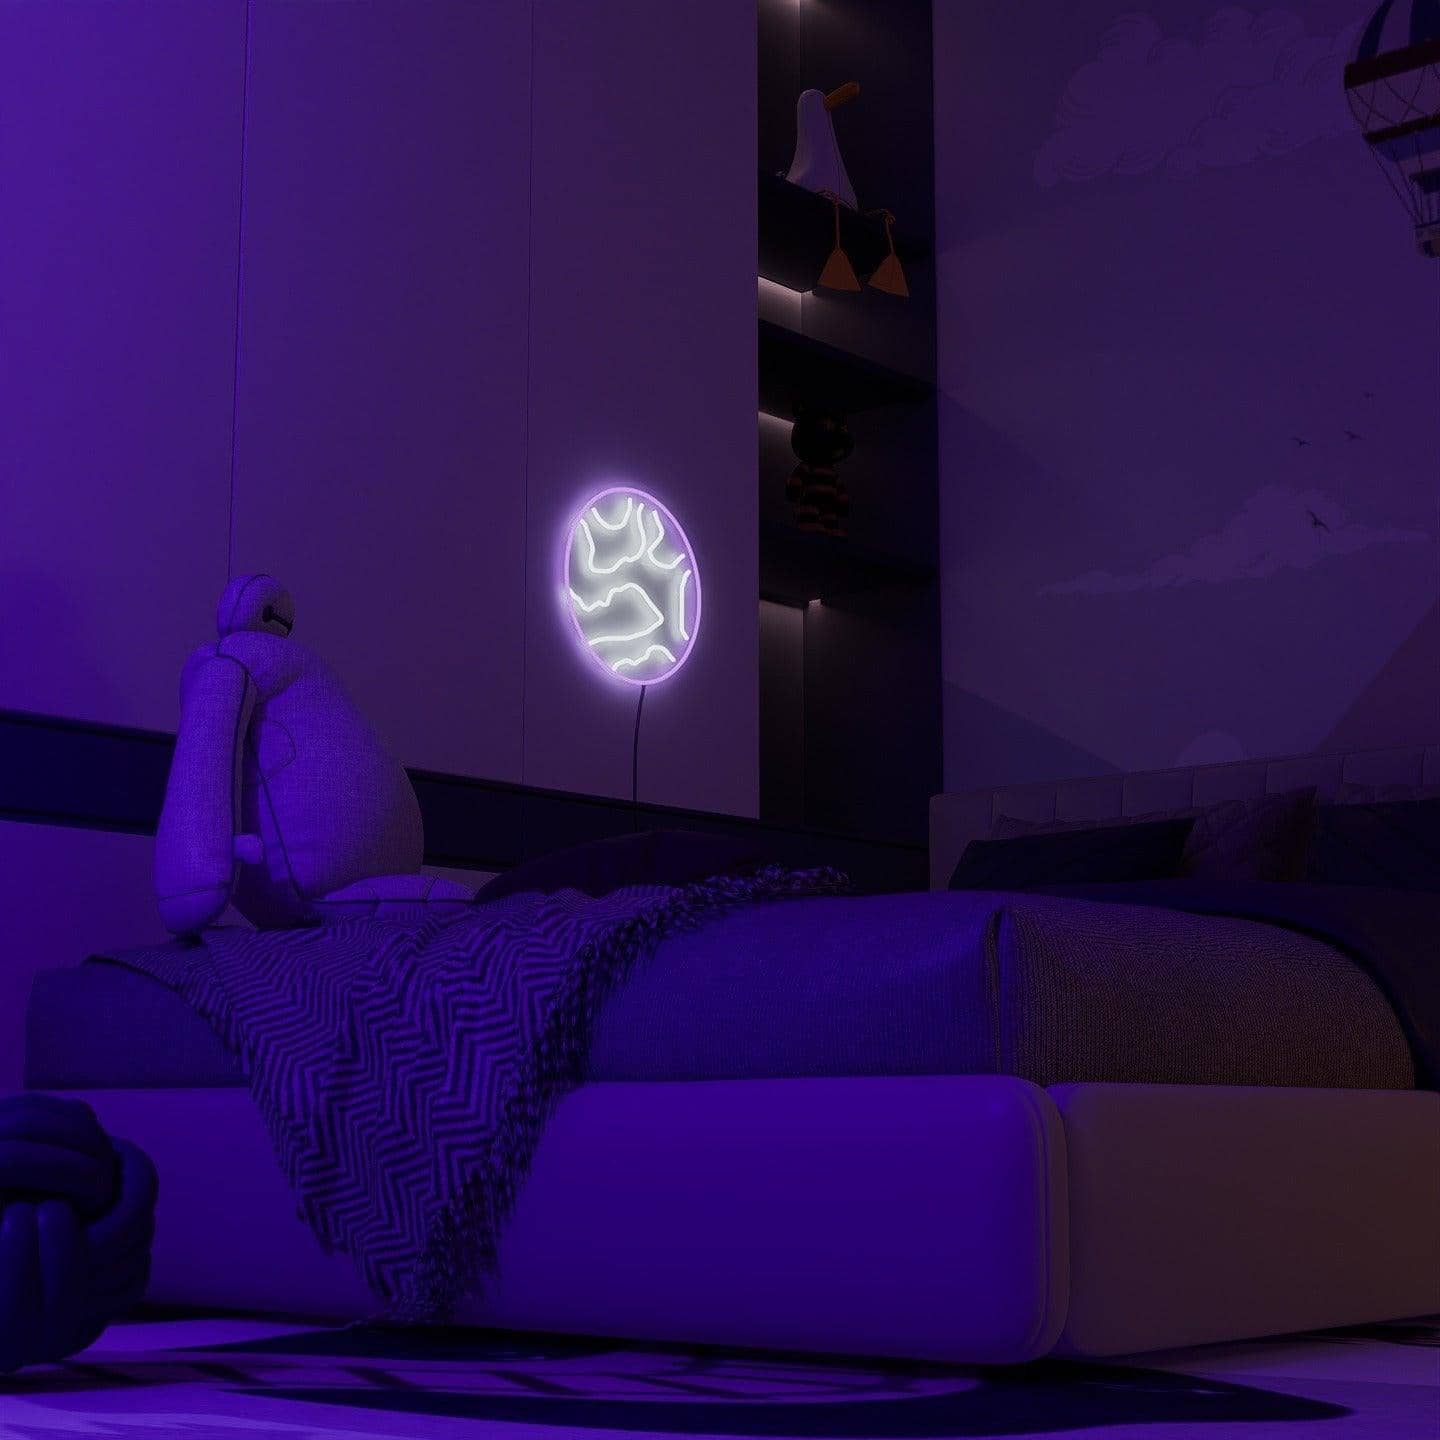 light-up-neon-lights-and-hang-them-in-your-bedroom-for-display-mercury